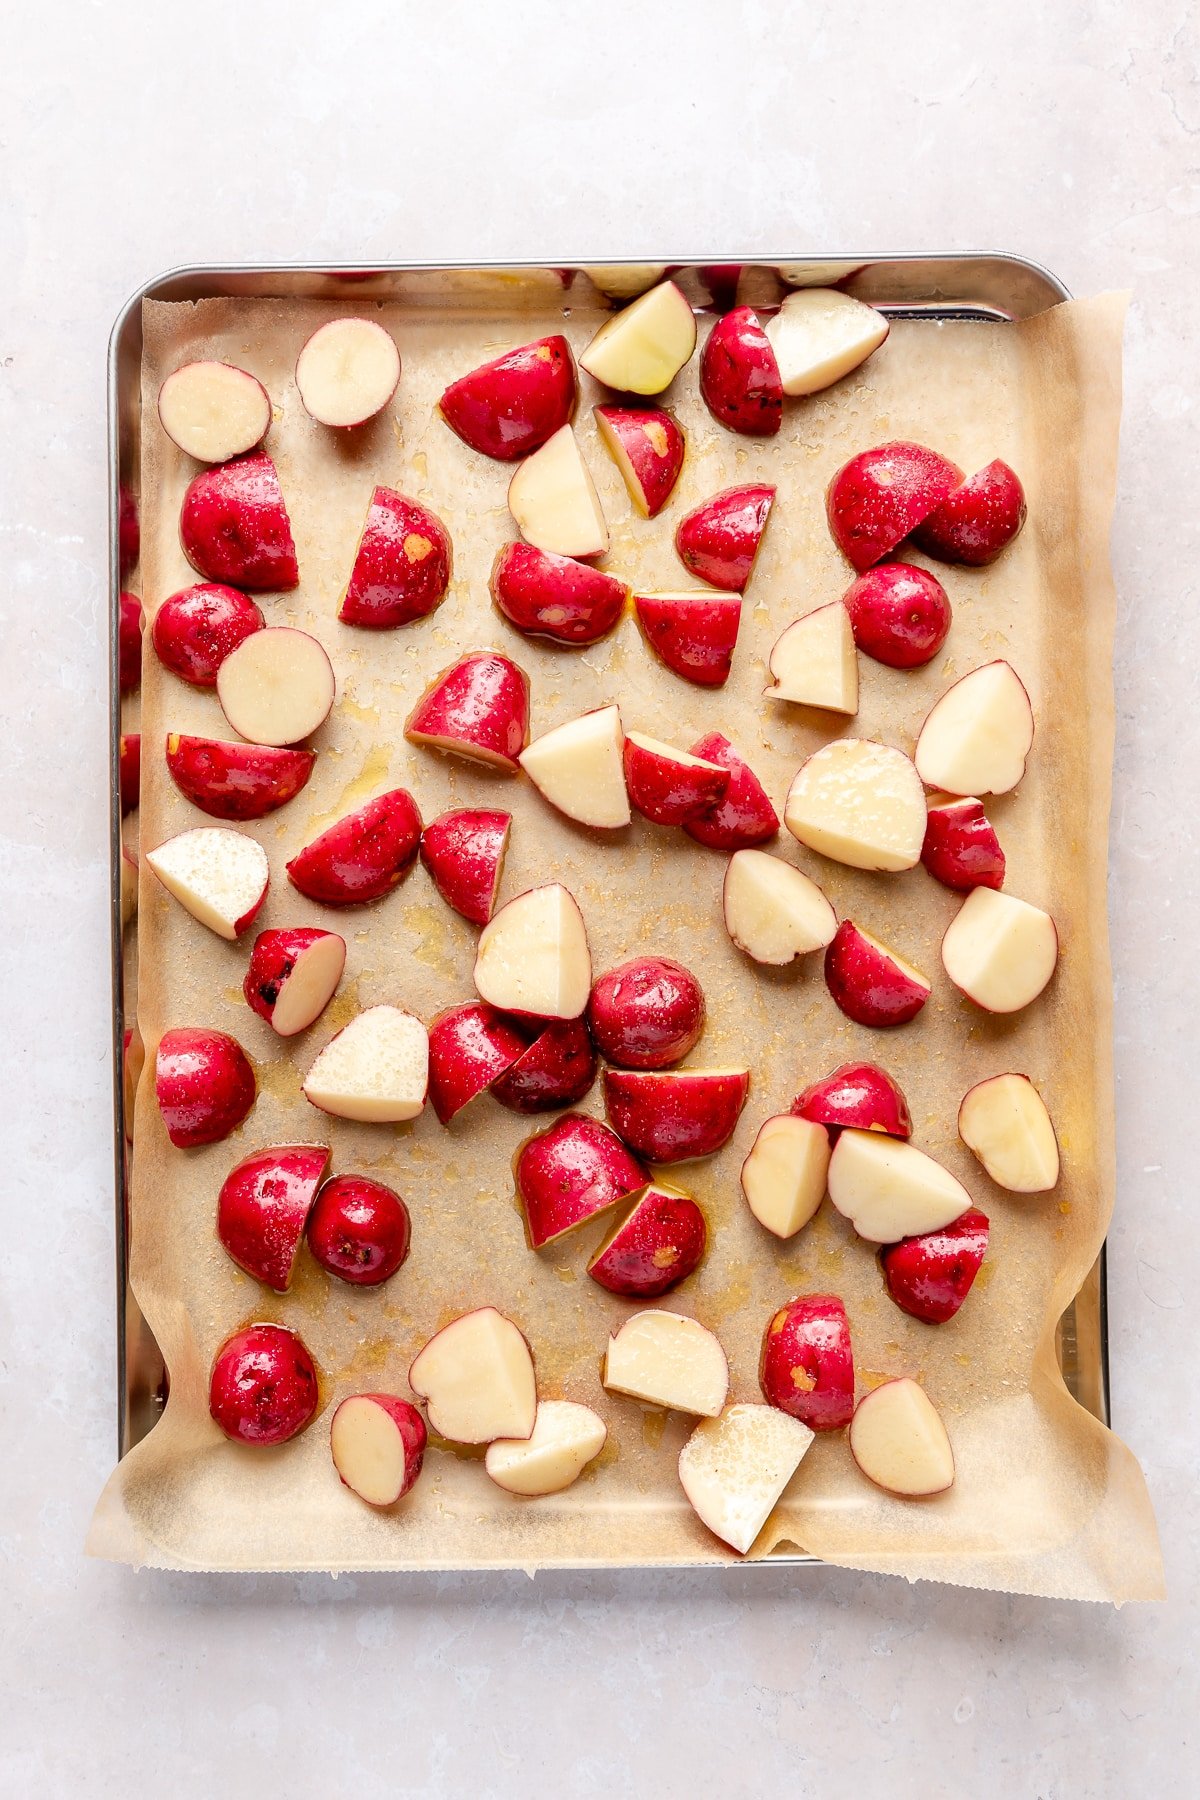 Halved red potatoes sit on a parchment lined baking sheet. They have been drizzled with olive oil and salt.